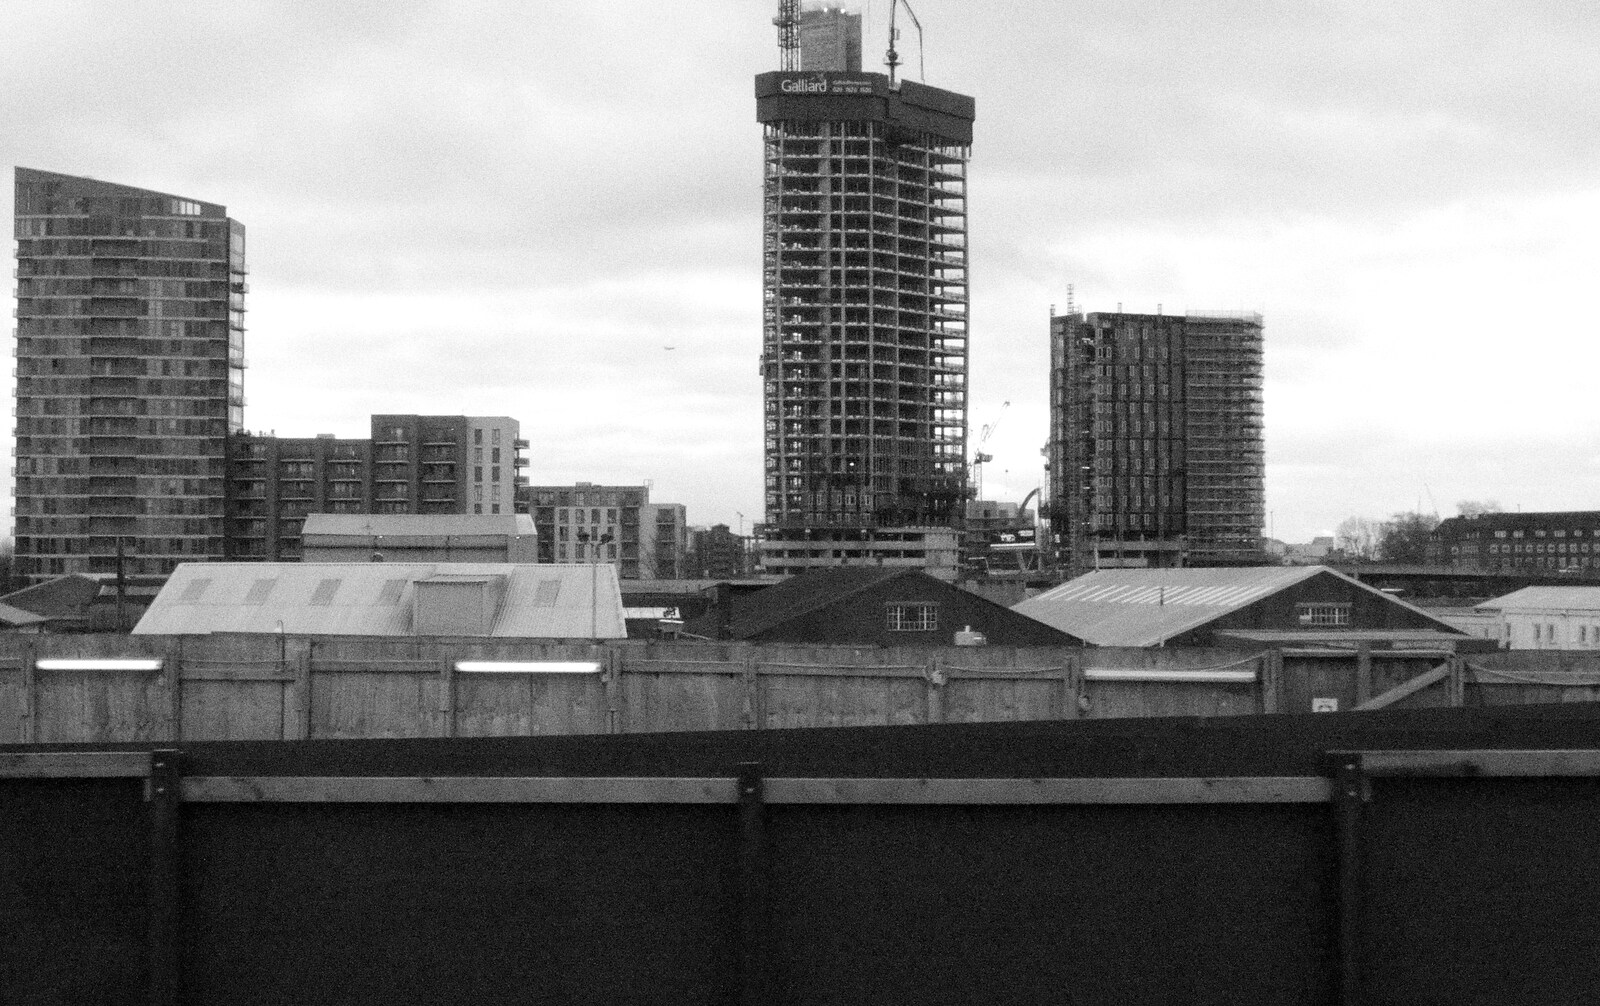 Tower block construction from A London Lunch, Borough, Southwark - 15th December 2015